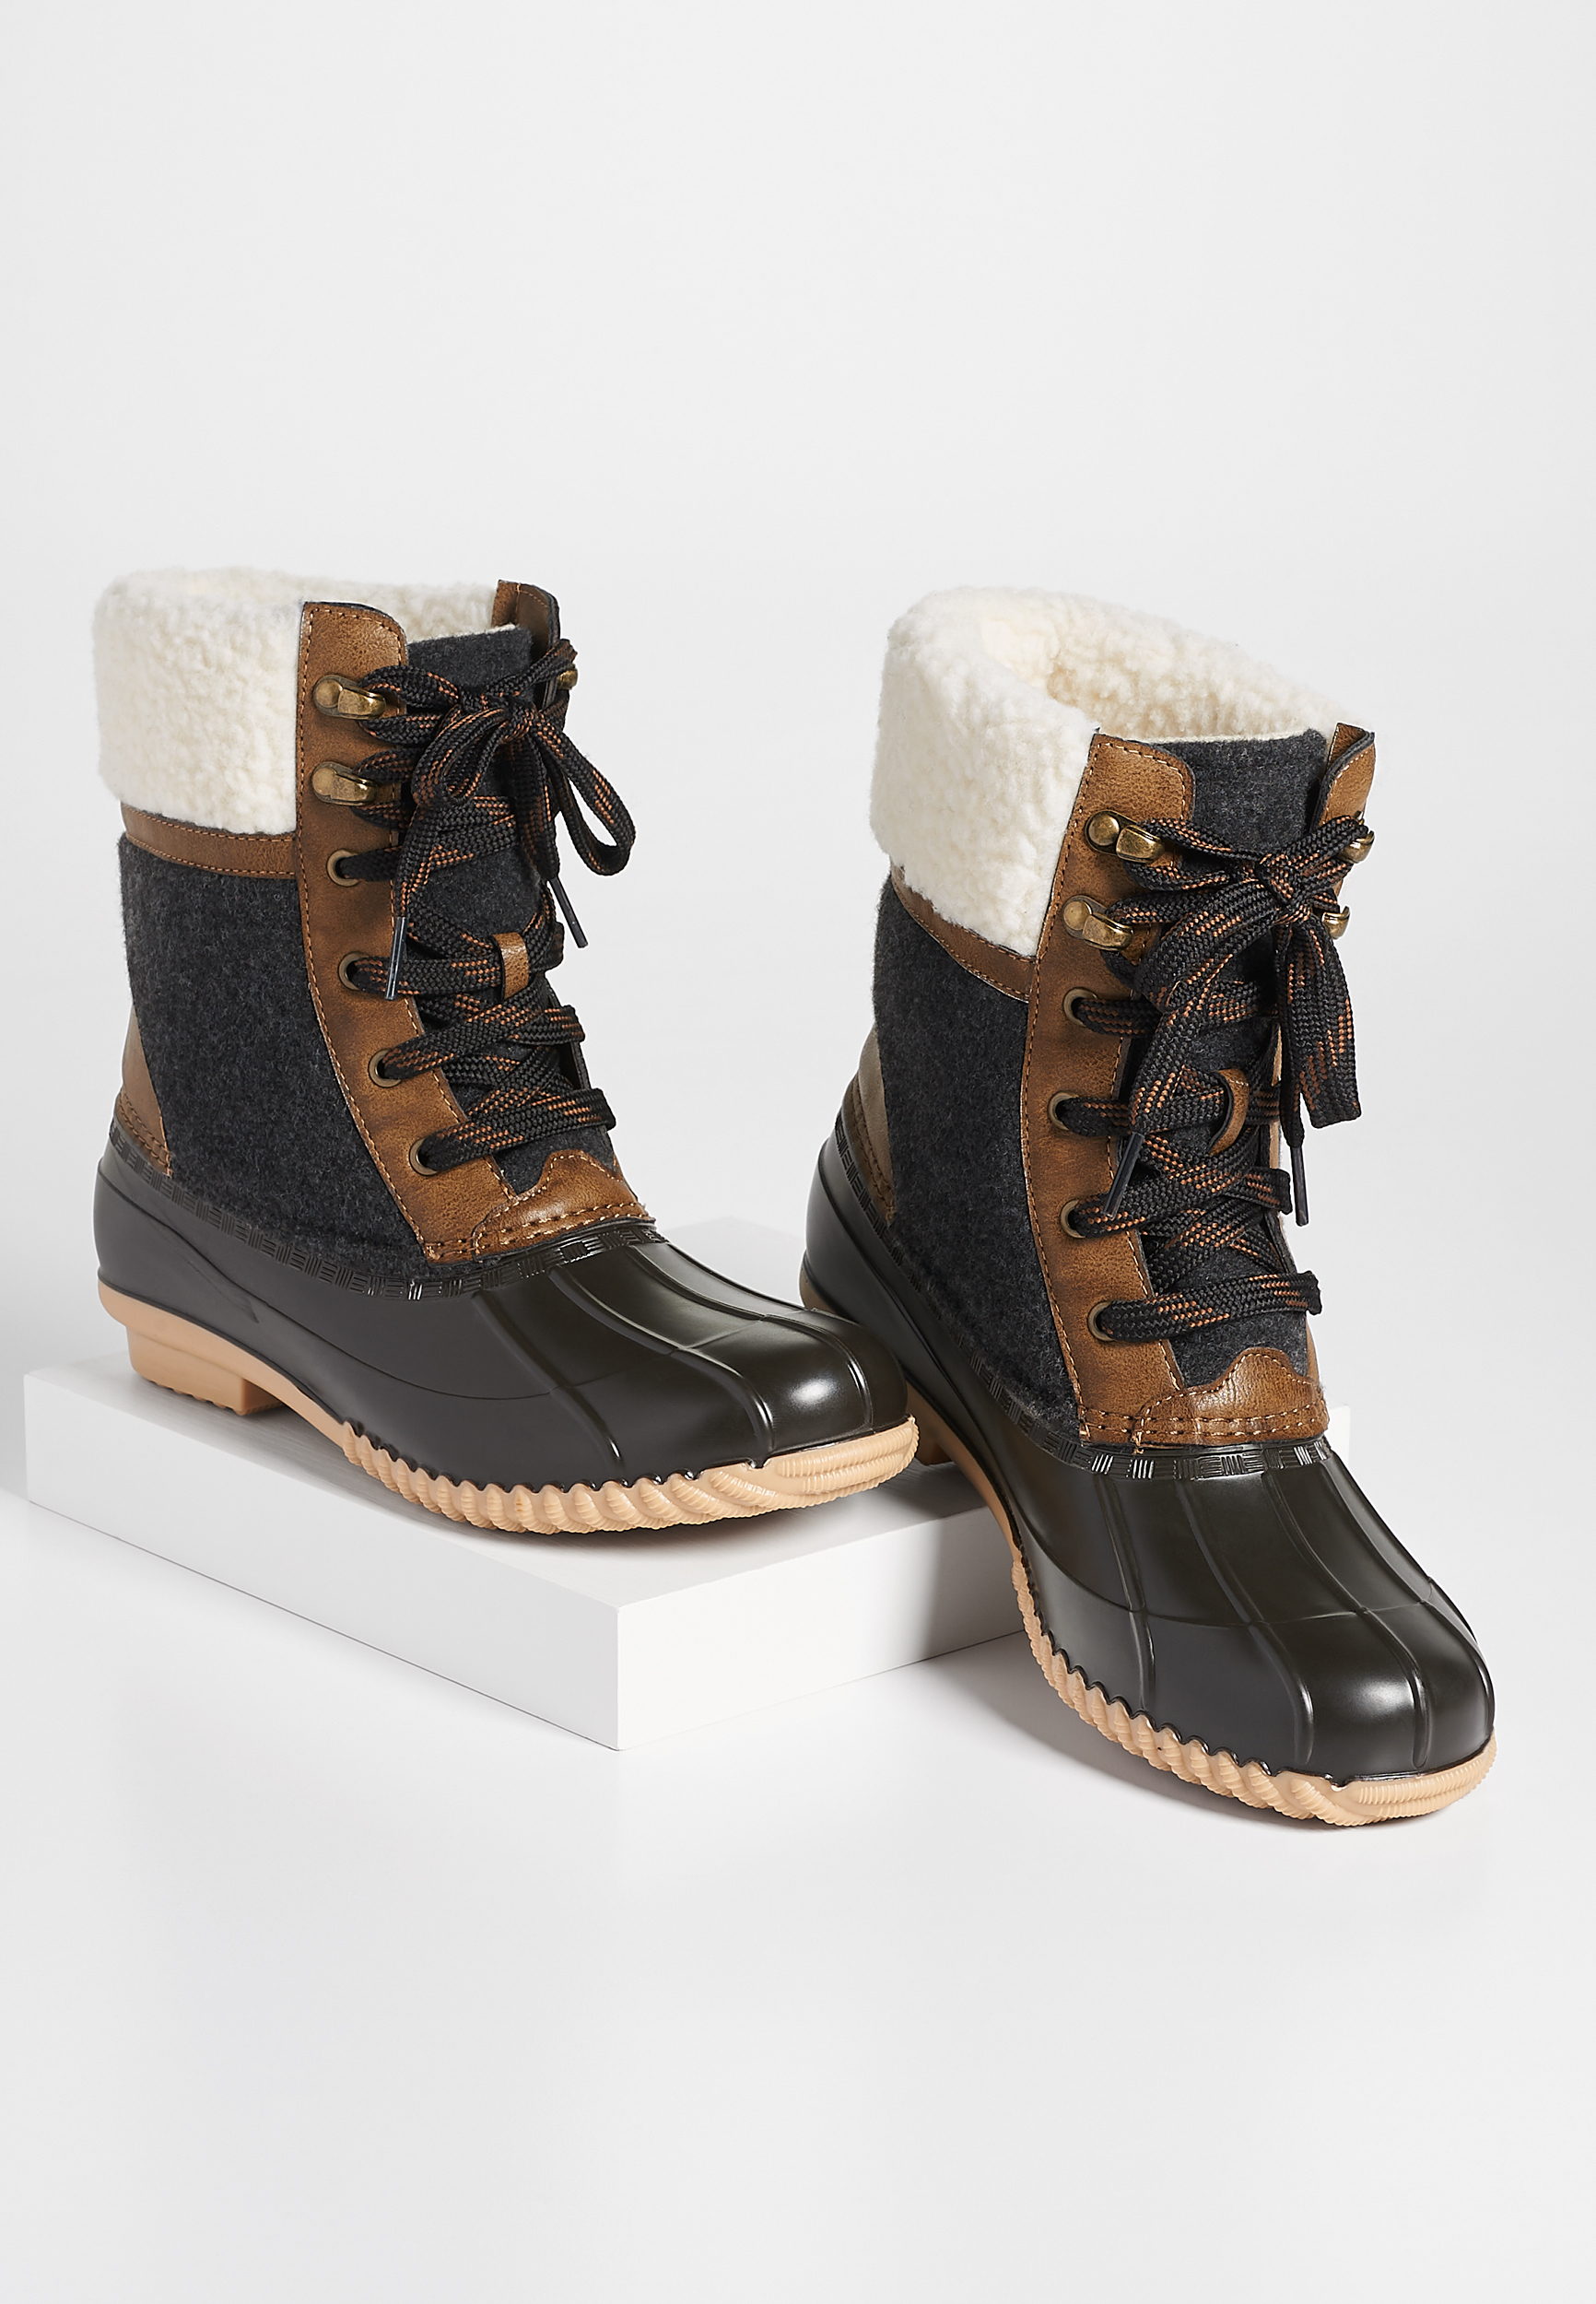 wool lined duck boots